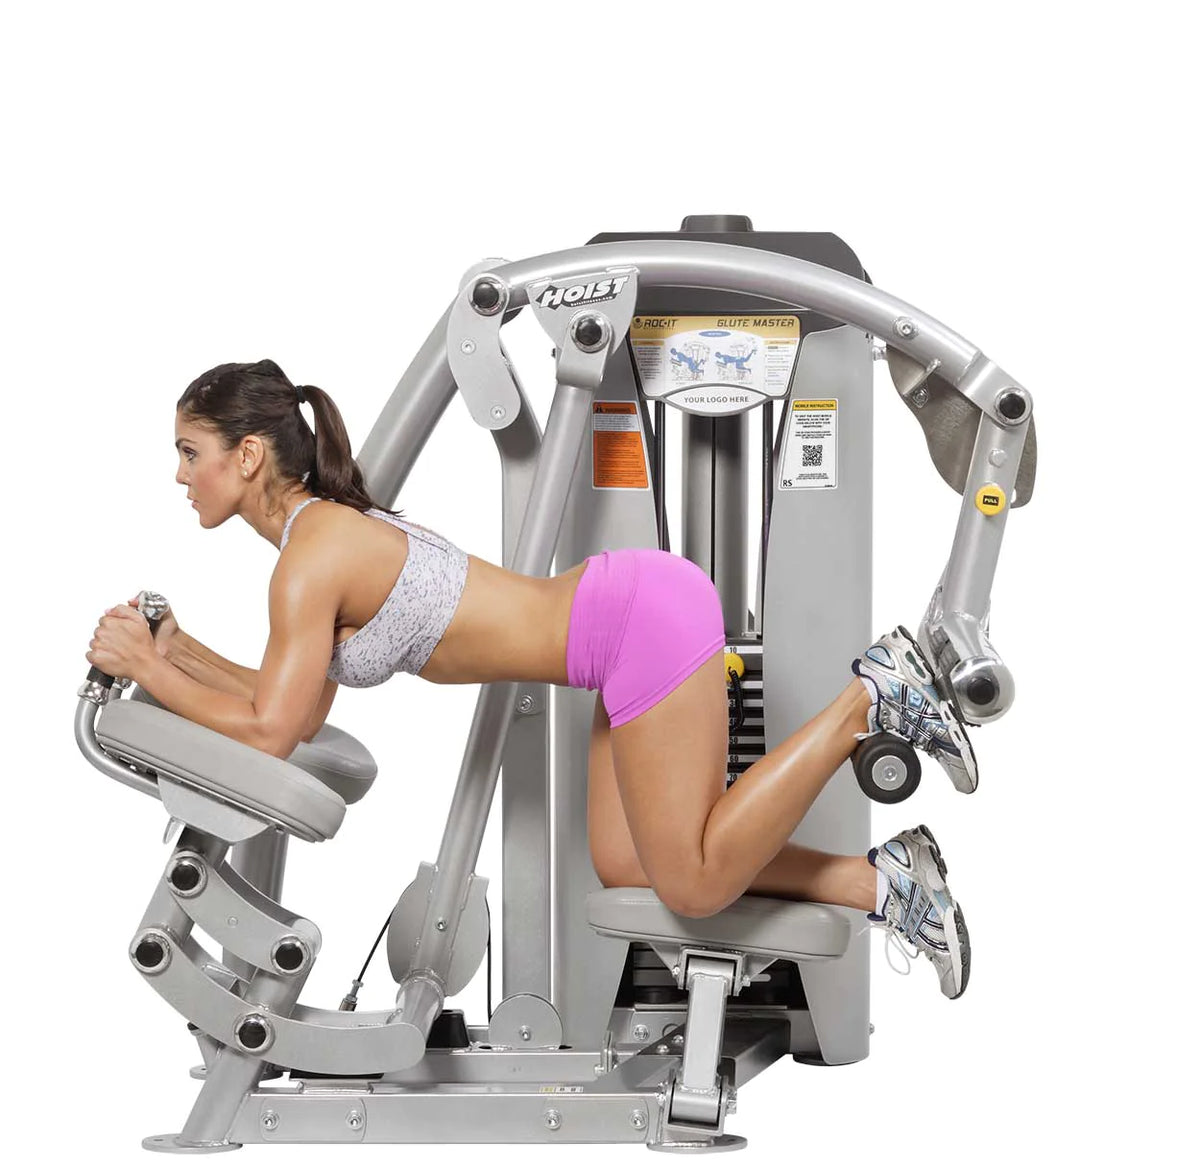 Hoist Fitness RS-1412 Glute Master side view | Fitness Experience